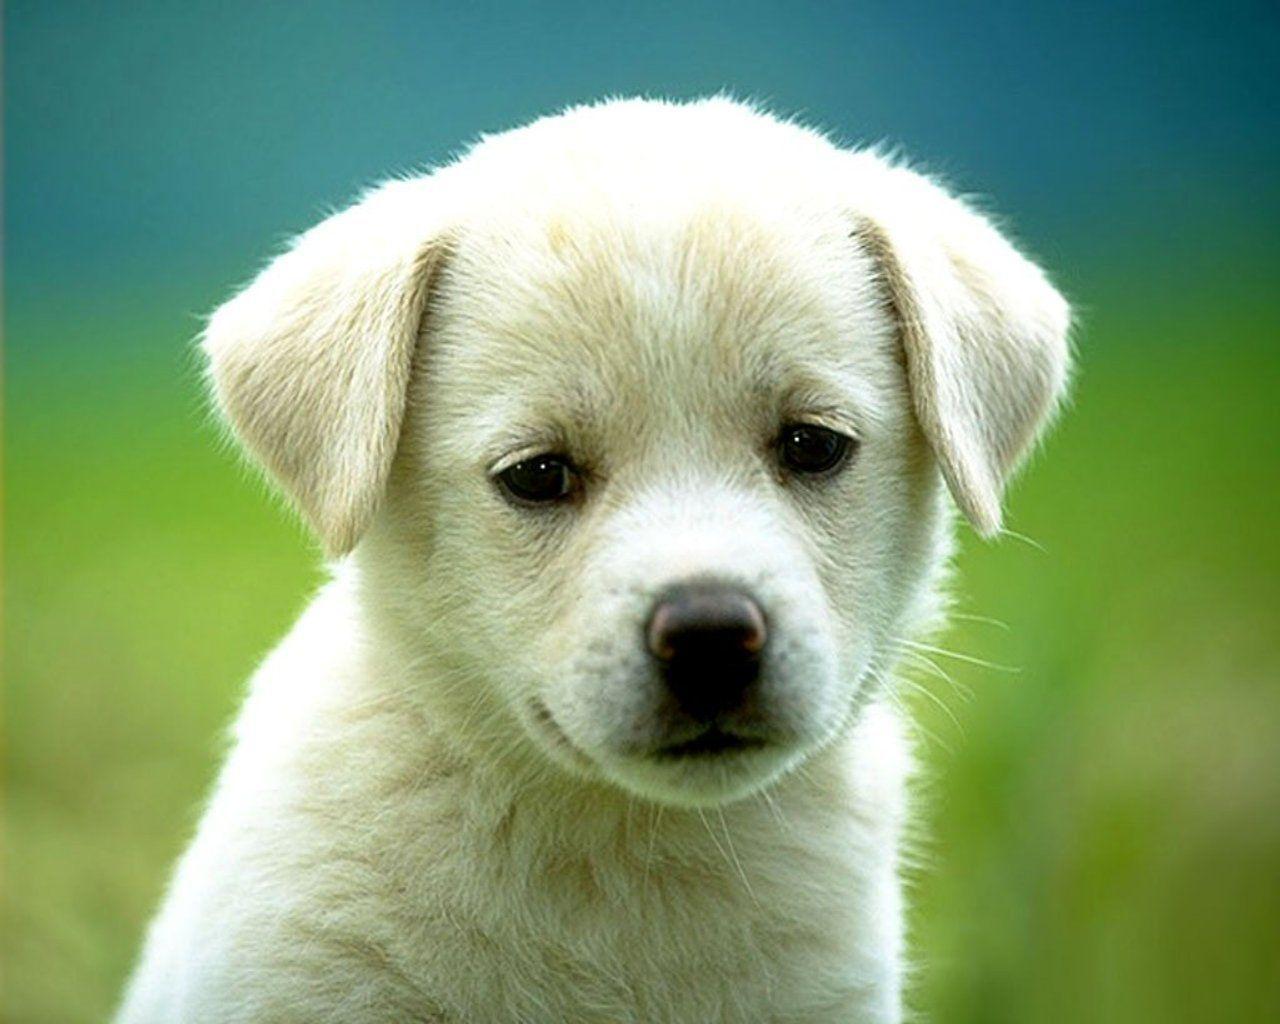 Cute puppies wallpaper hdAmazoncaAppstore for Android